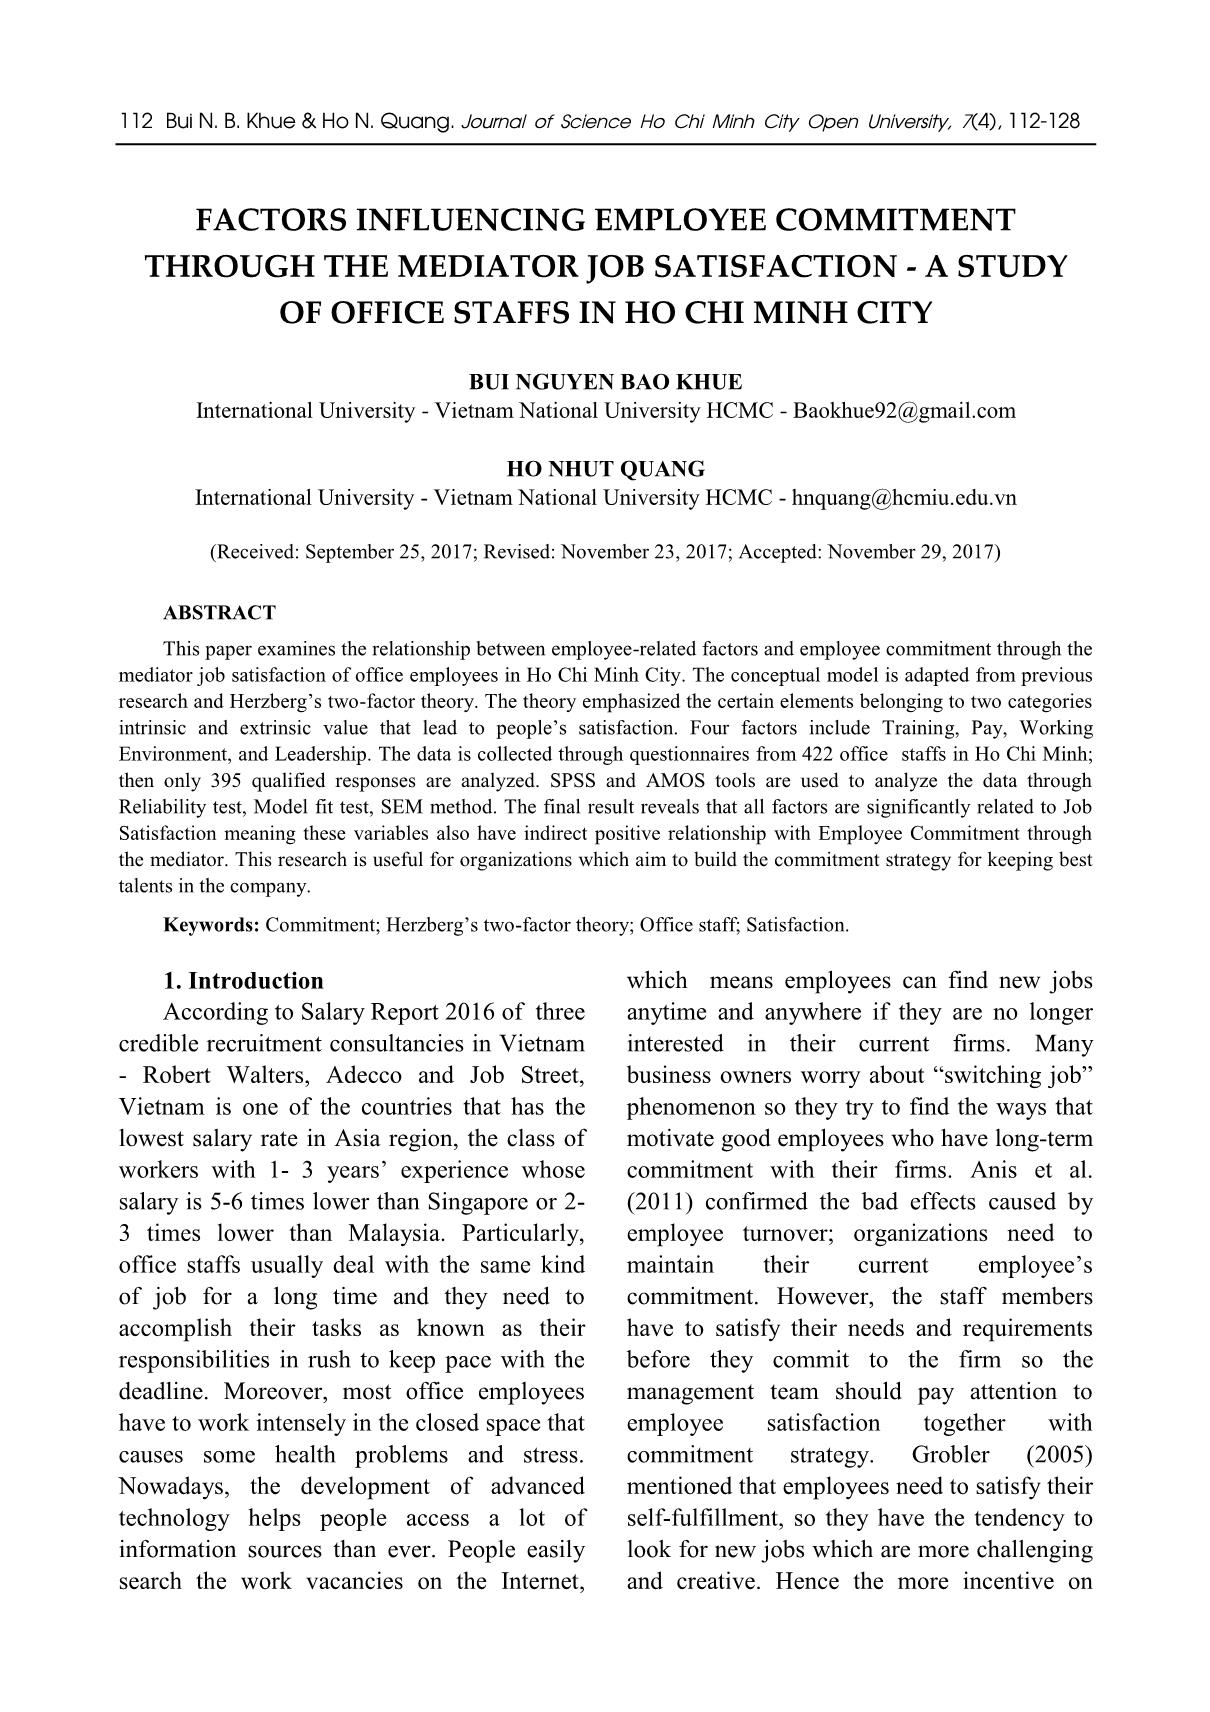 Factors influencing employee commitment through the mediator job satisfaction - A study of office staffs in Ho Chi Minh city trang 1